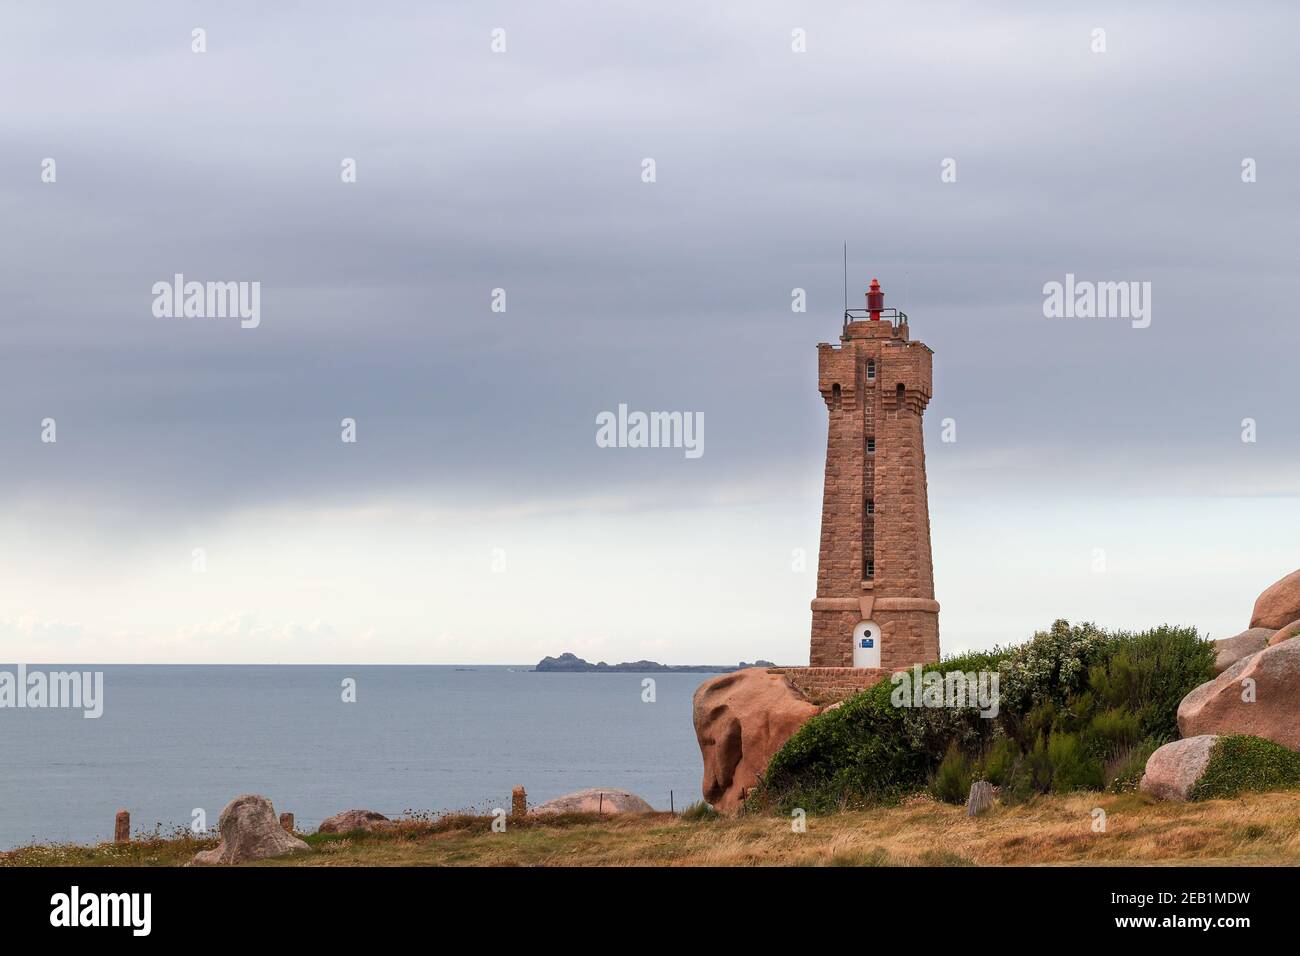 Early evening at the Ploumanac'h Lighthouse - Mean Ruz Lighthouse - active lighthouse in Perros-Guirec, Cotes-d'Armor, Brittany, France Stock Photo